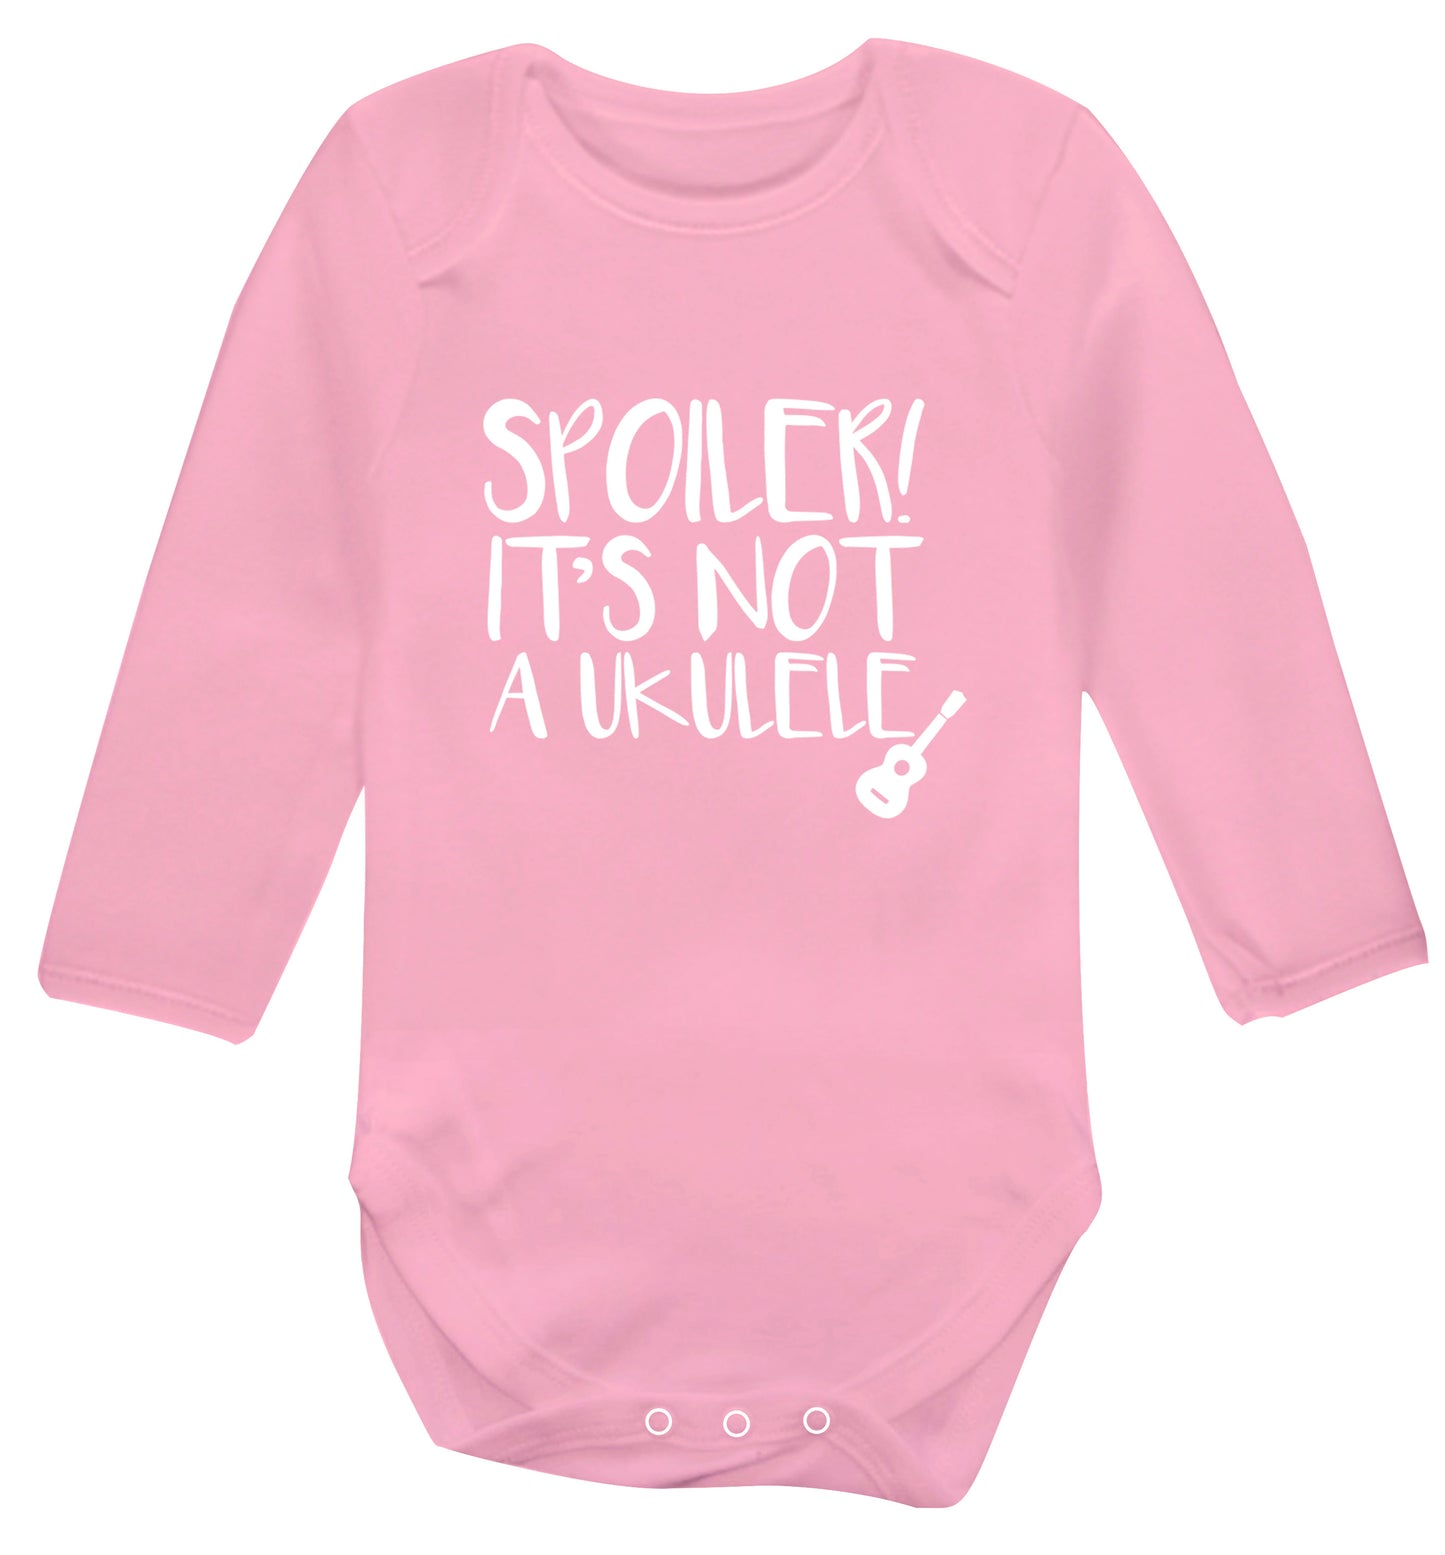 Spoiler it's not a ukulele Baby Vest long sleeved pale pink 6-12 months